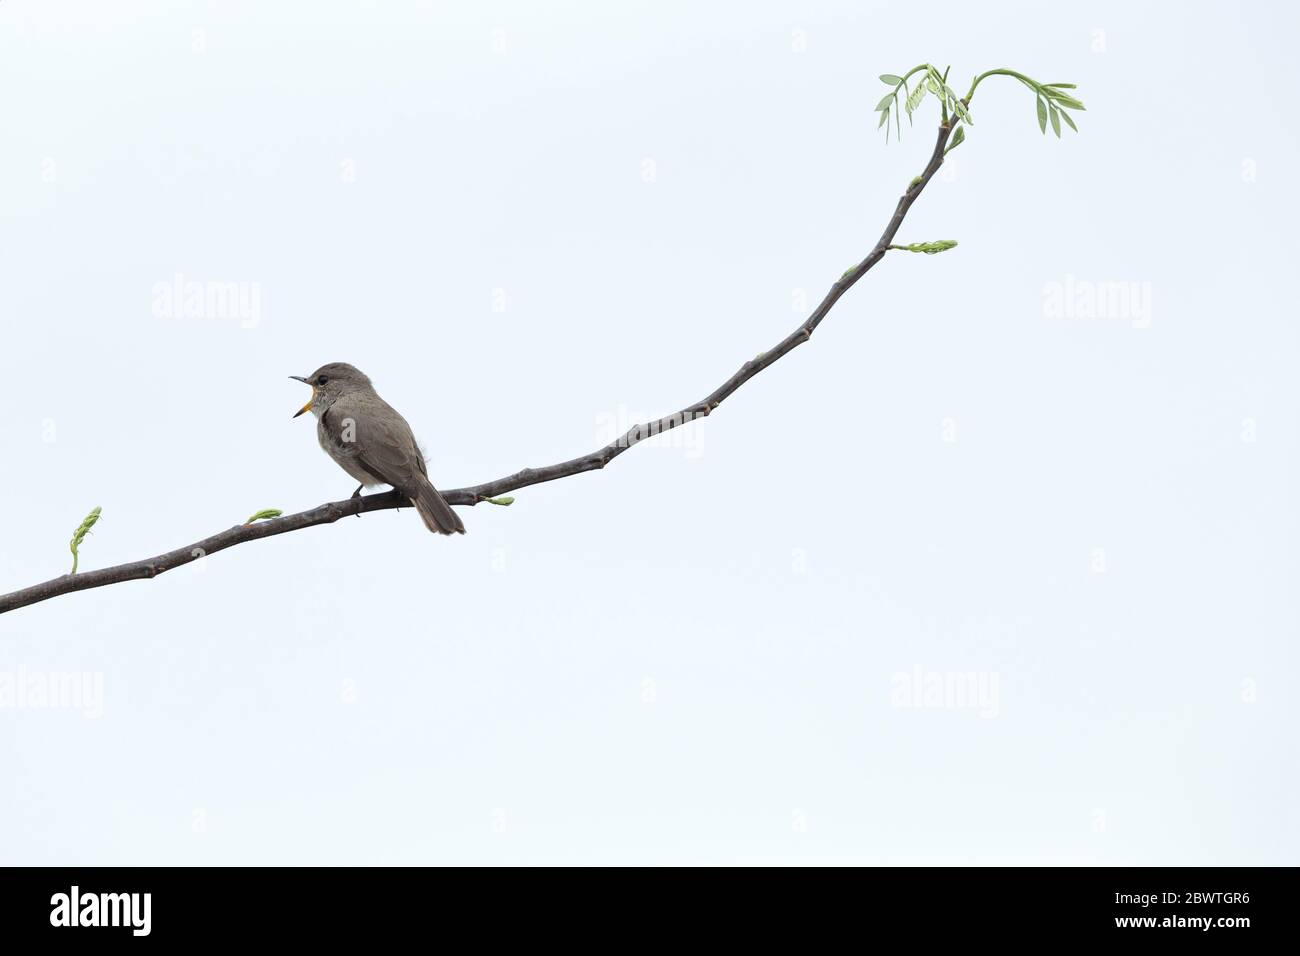 Pale flycatcher Melaenornis pallidus, perched on branch & singing, Mole National Park, Ghana, March Stock Photo